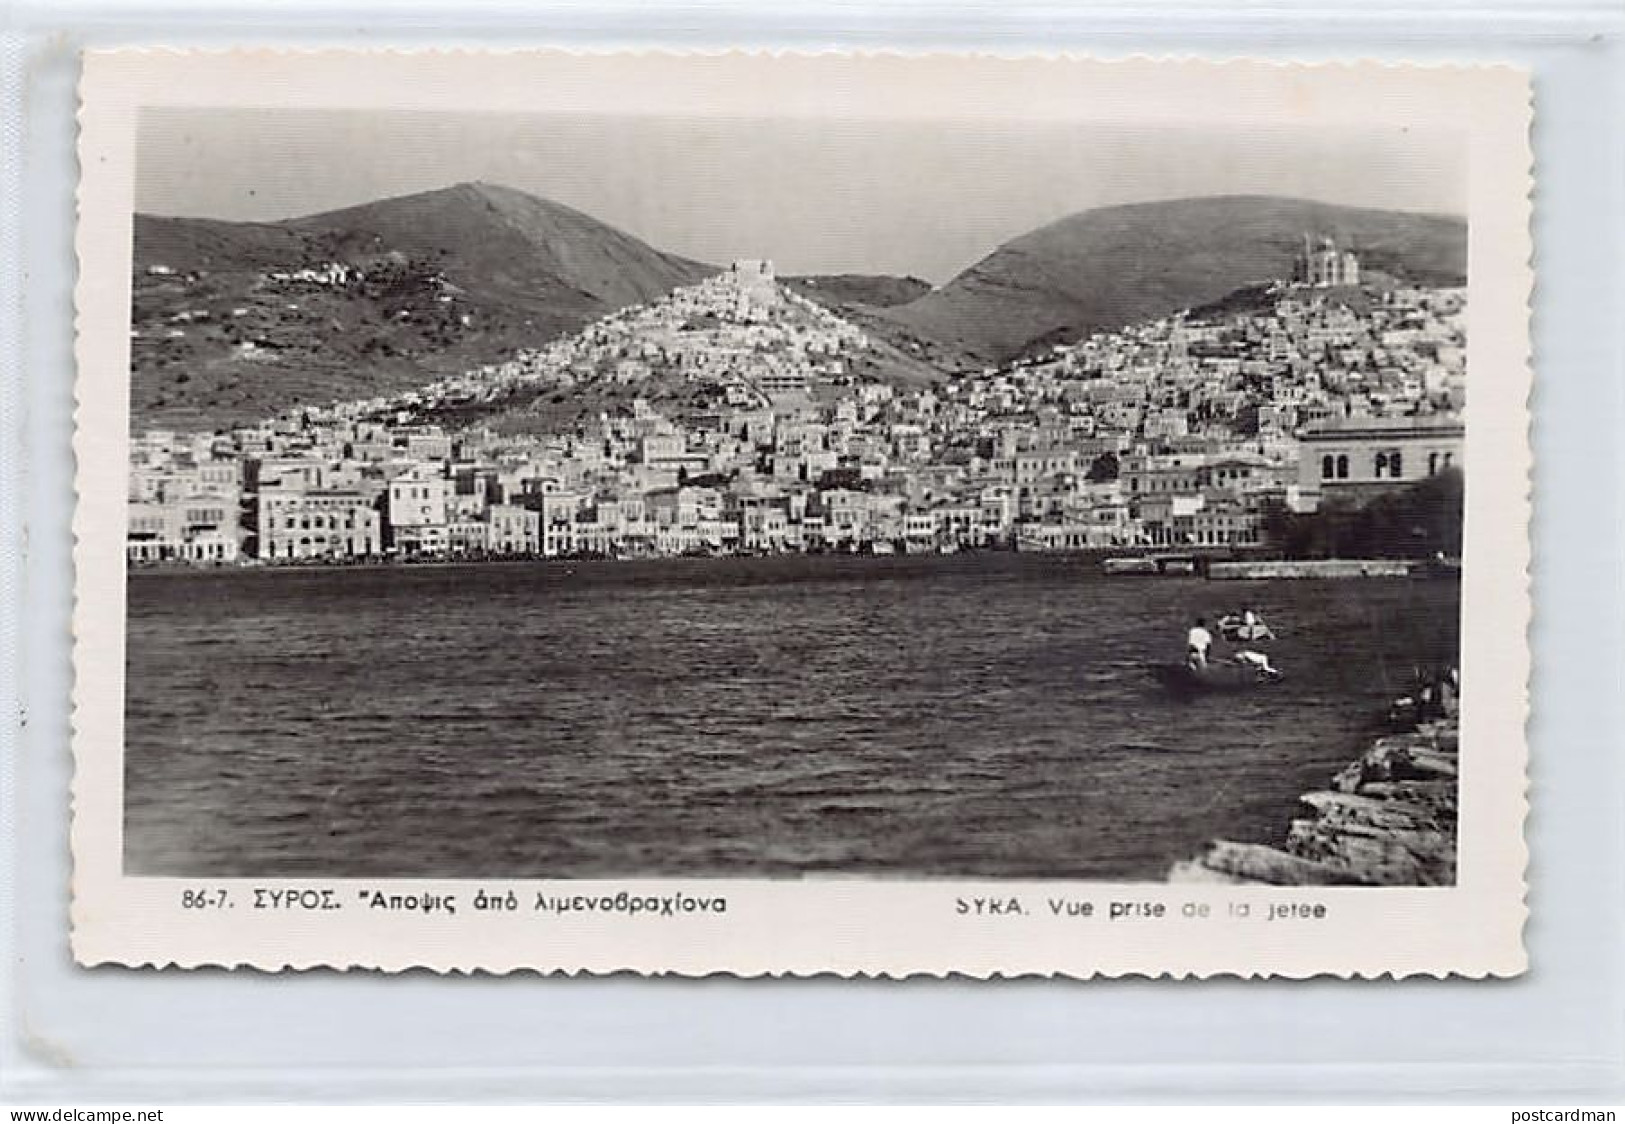 Greece - SYROS Syra - View From The Jetty - REAL PHOTO - Publ. E. Kaluta 867 - Grèce